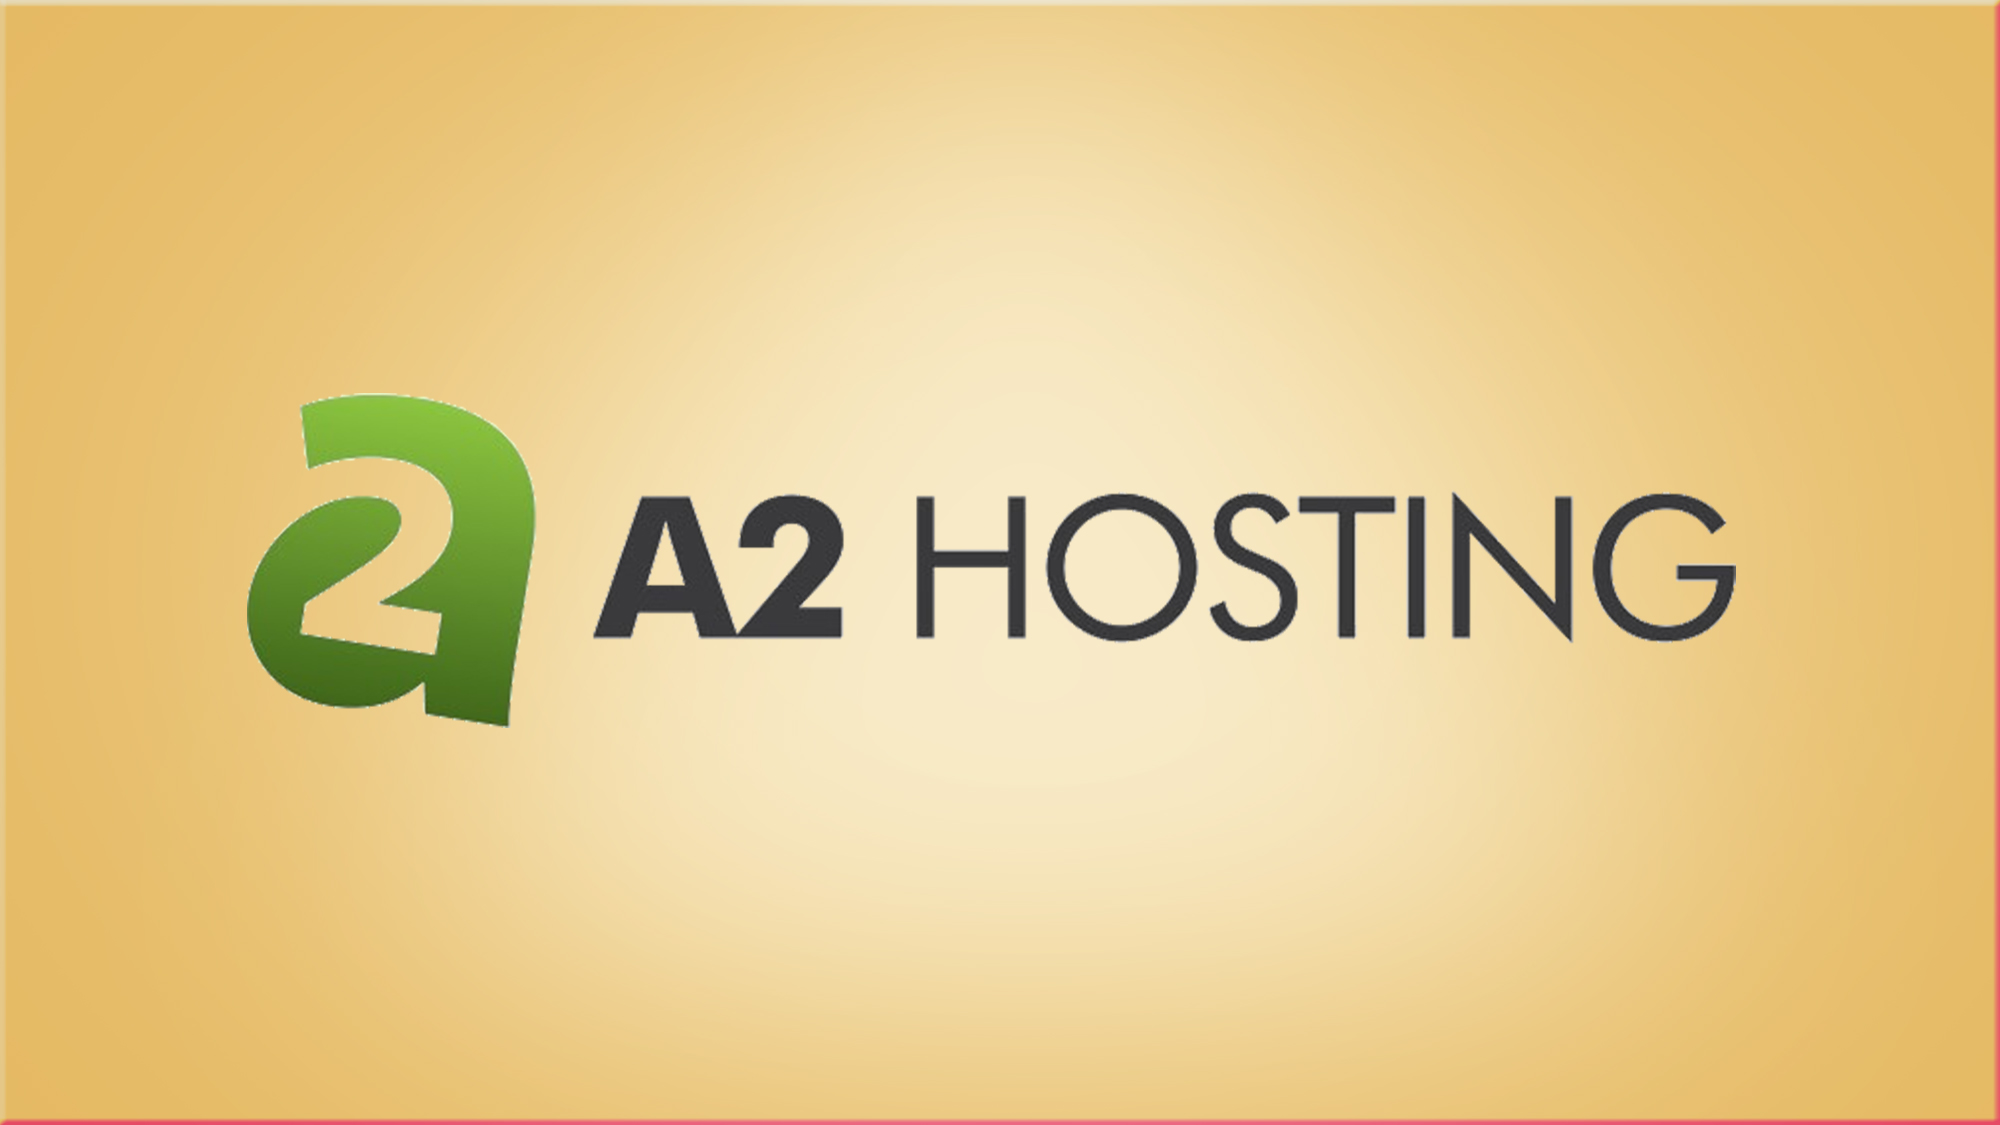 A2 Hosting logo on yellow background with spotlight effect